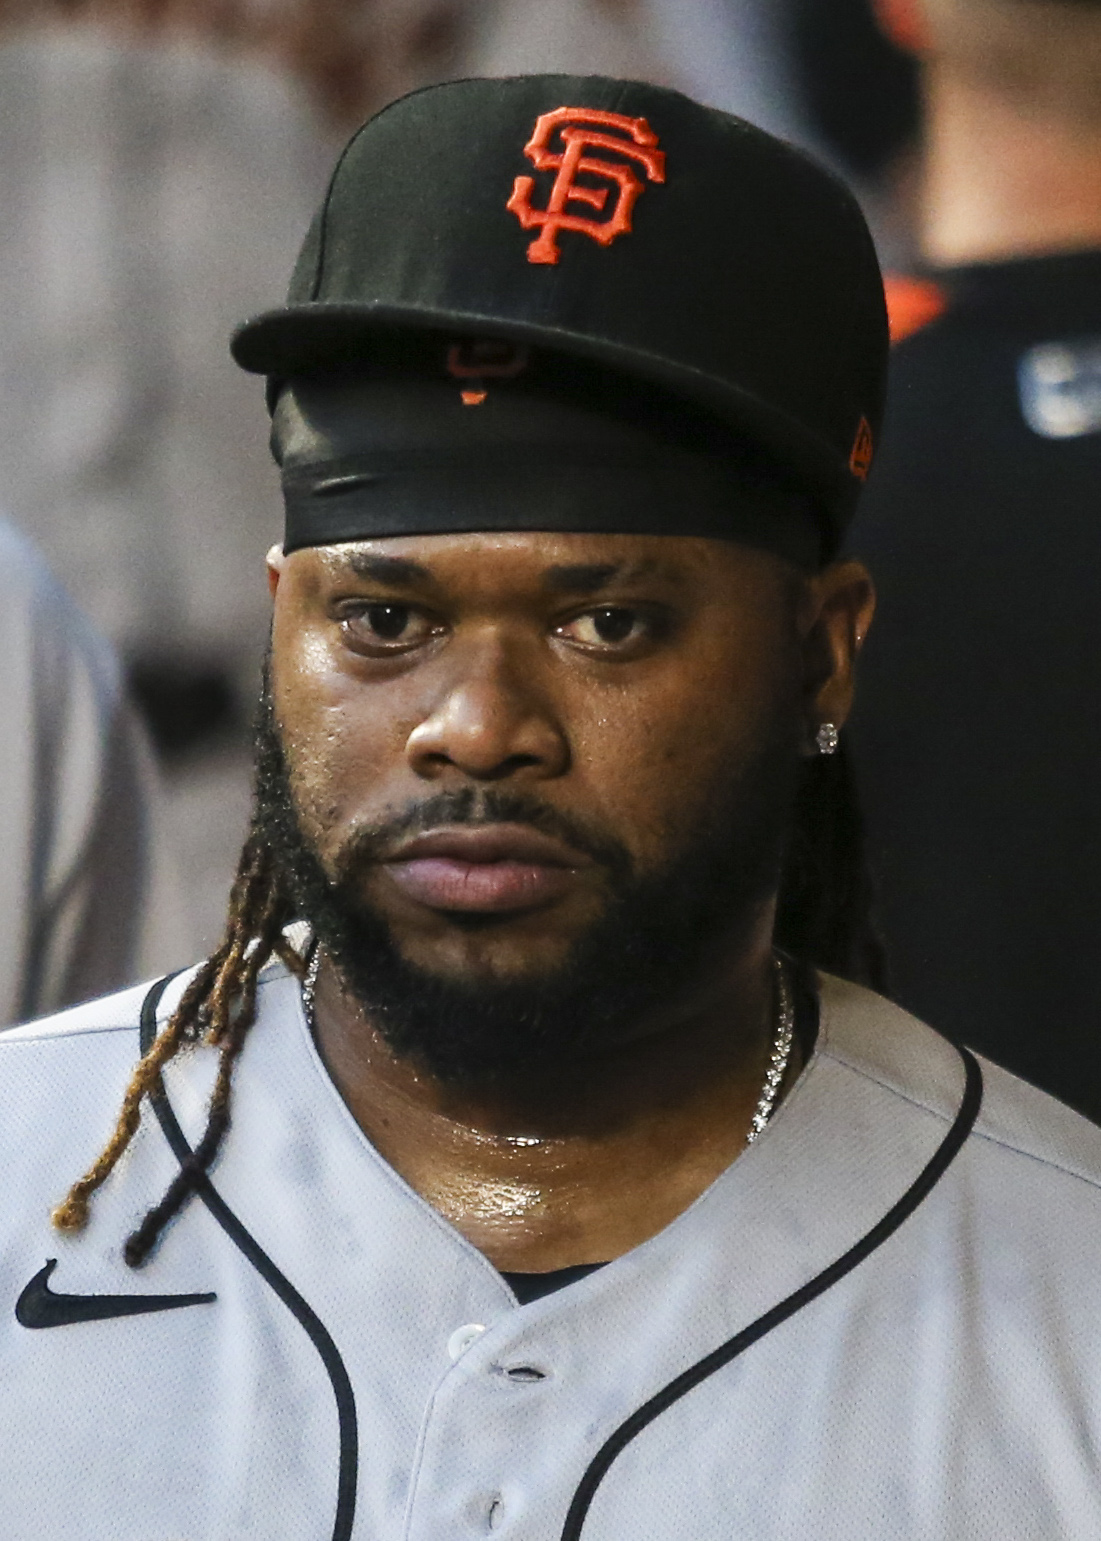 Johnny Cueto not opting out of deal with Giants